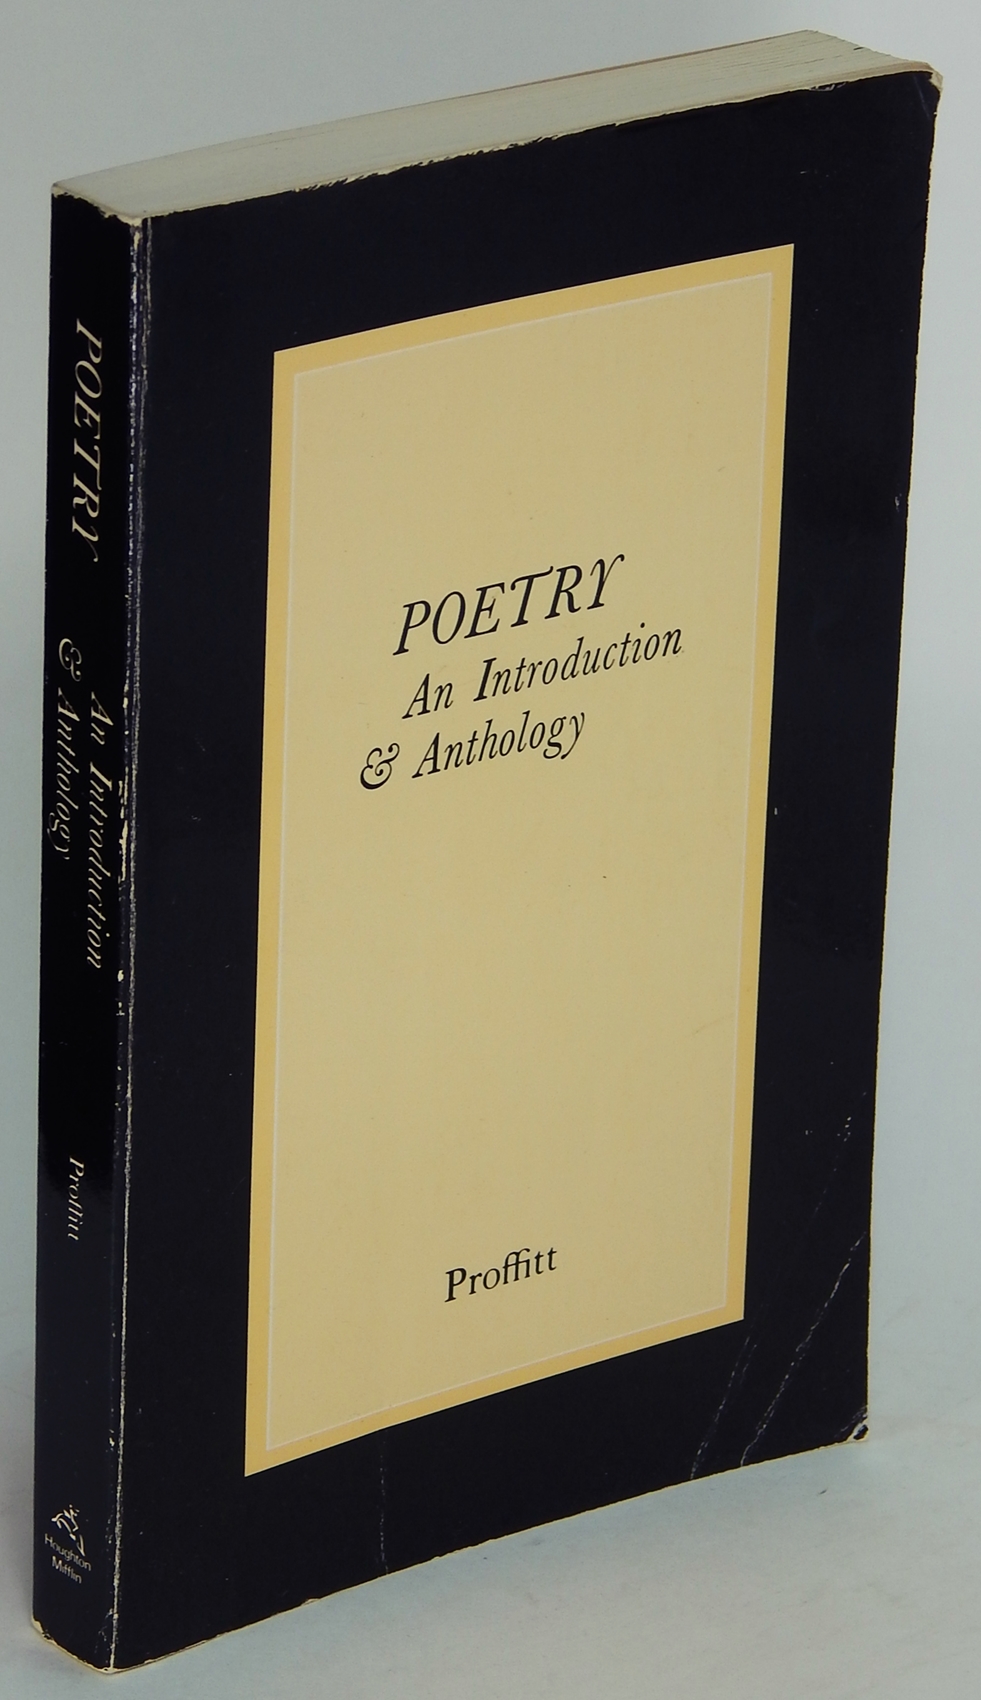 PROFFITT, EDWARD - Poetry: An Introduction and Anthology